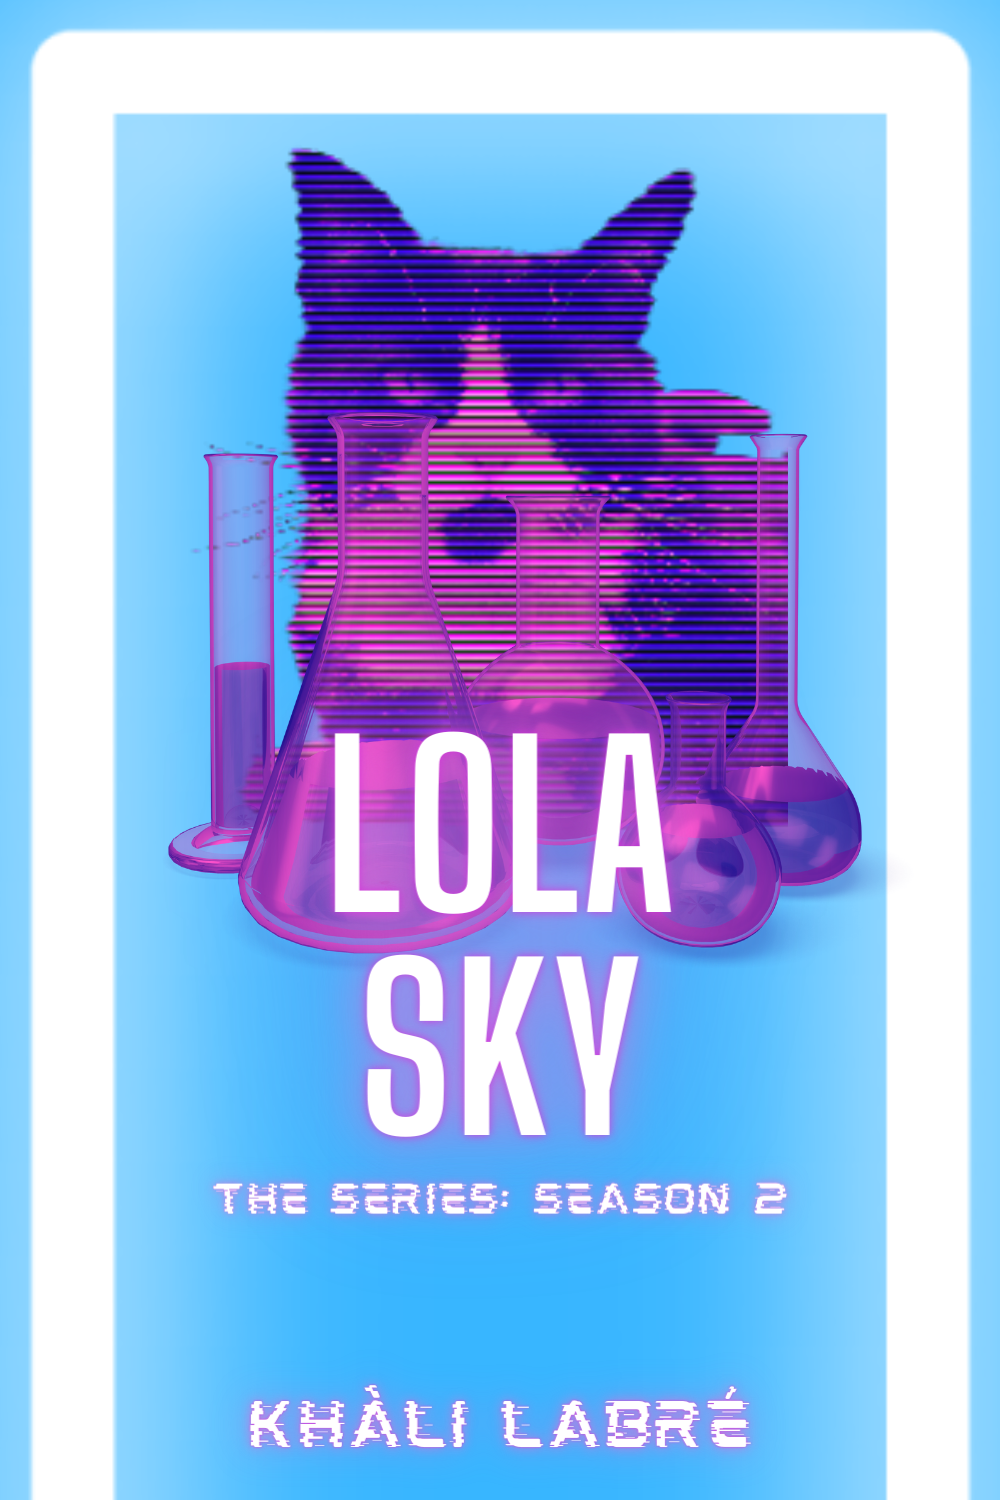 Lola Sky Season 2 is Now Available! Download the E-Book Here!